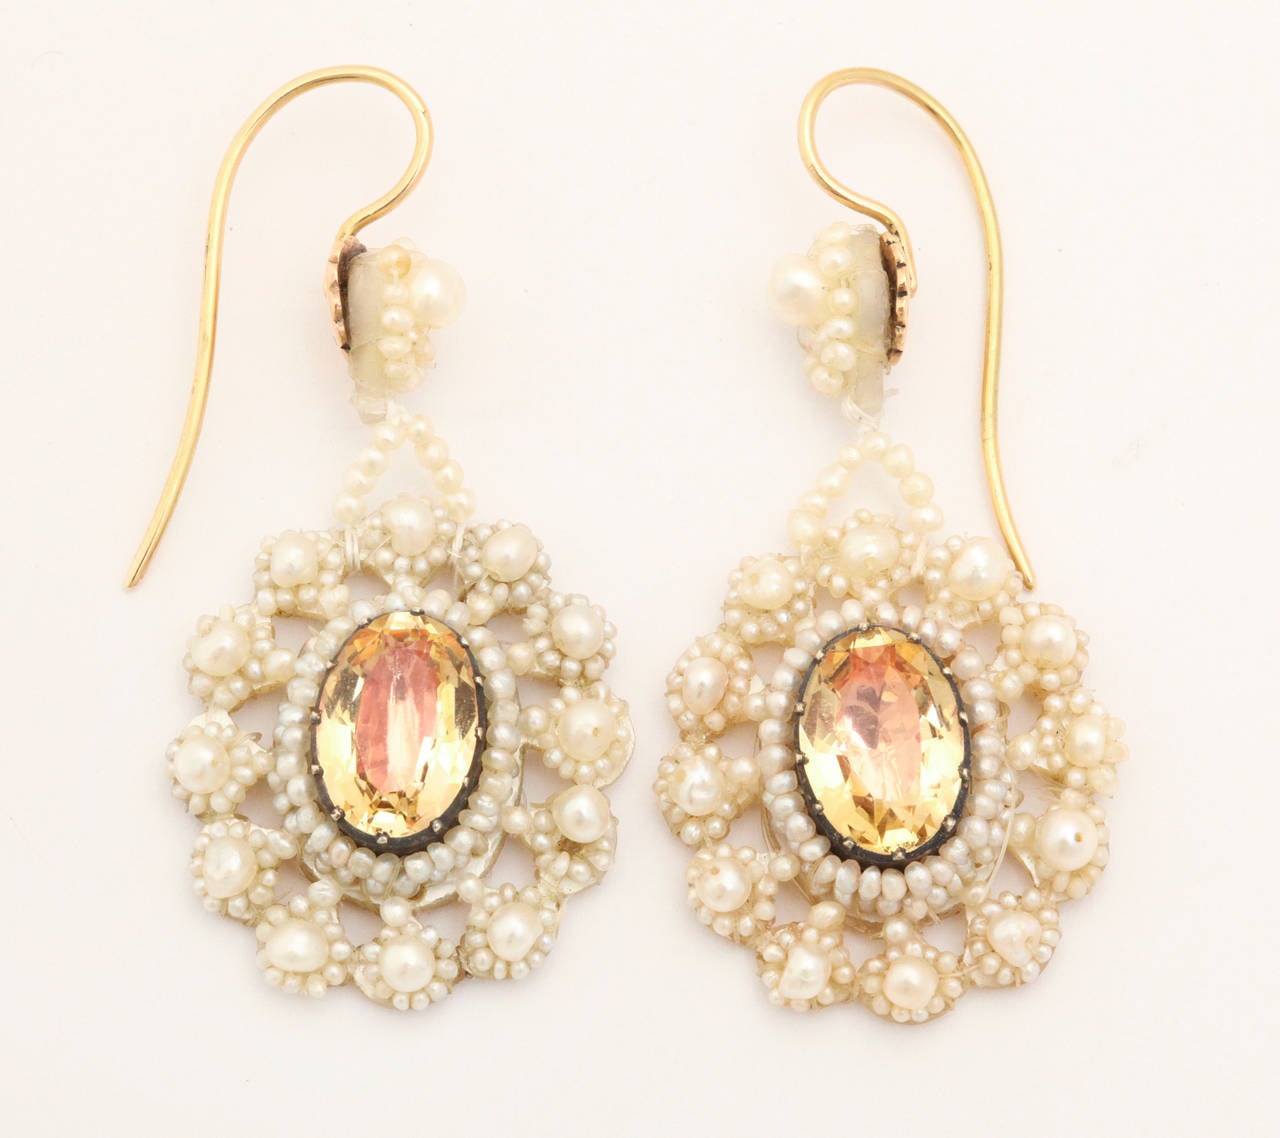 In the late Georgian period through the era, intricate seed pearl jewelry was tradition for young women and brides. Here a pair of chandelier, seed pearl earrings, intricate and delicate, no longer need a wedding to brighten a woman's face, be she